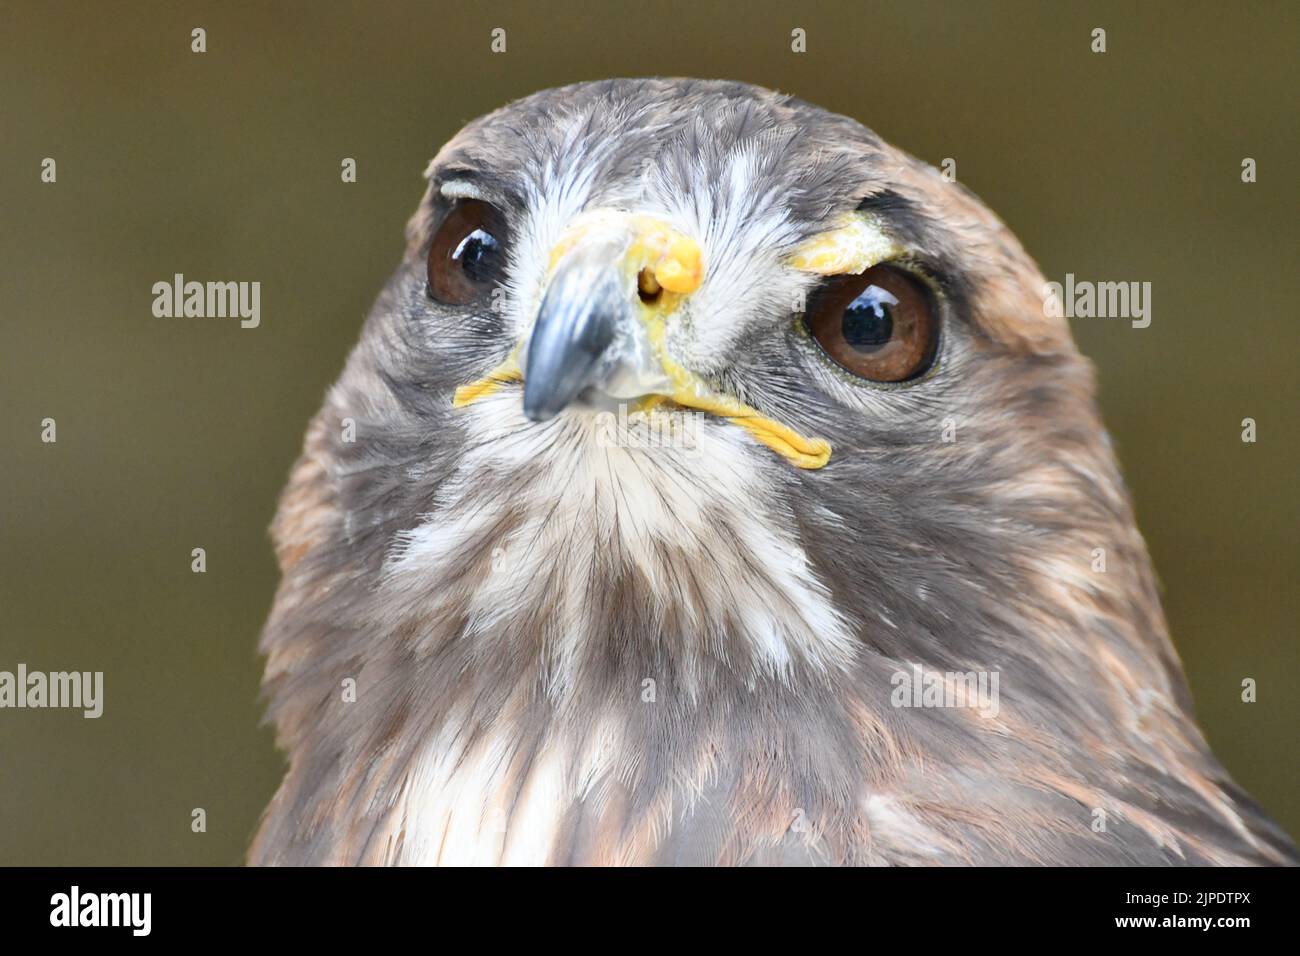 Red Tailed Hawk called Jaffer at The Cotswold Falconry Centre, Moreton in Marsh, Gloucestershire, England, UK Stock Photo